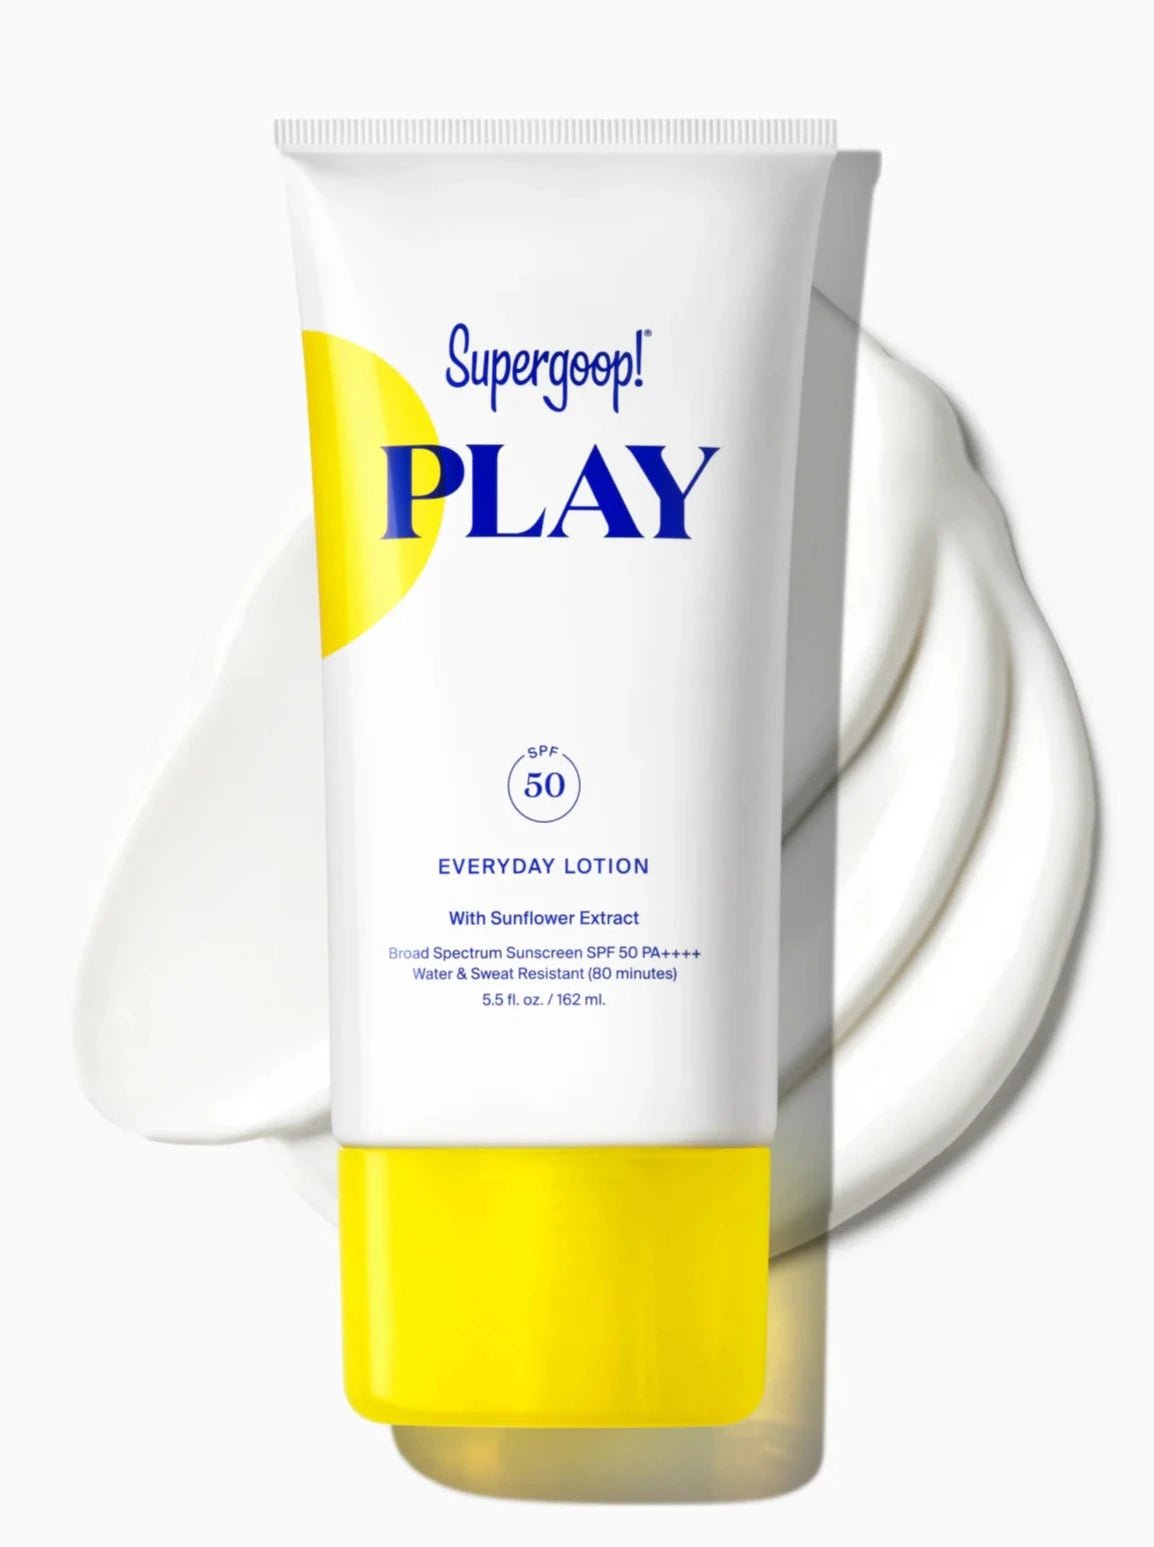 Supergoop! PLAY Everyday Lotion SPF 50 - 30A Gear - novelty misc